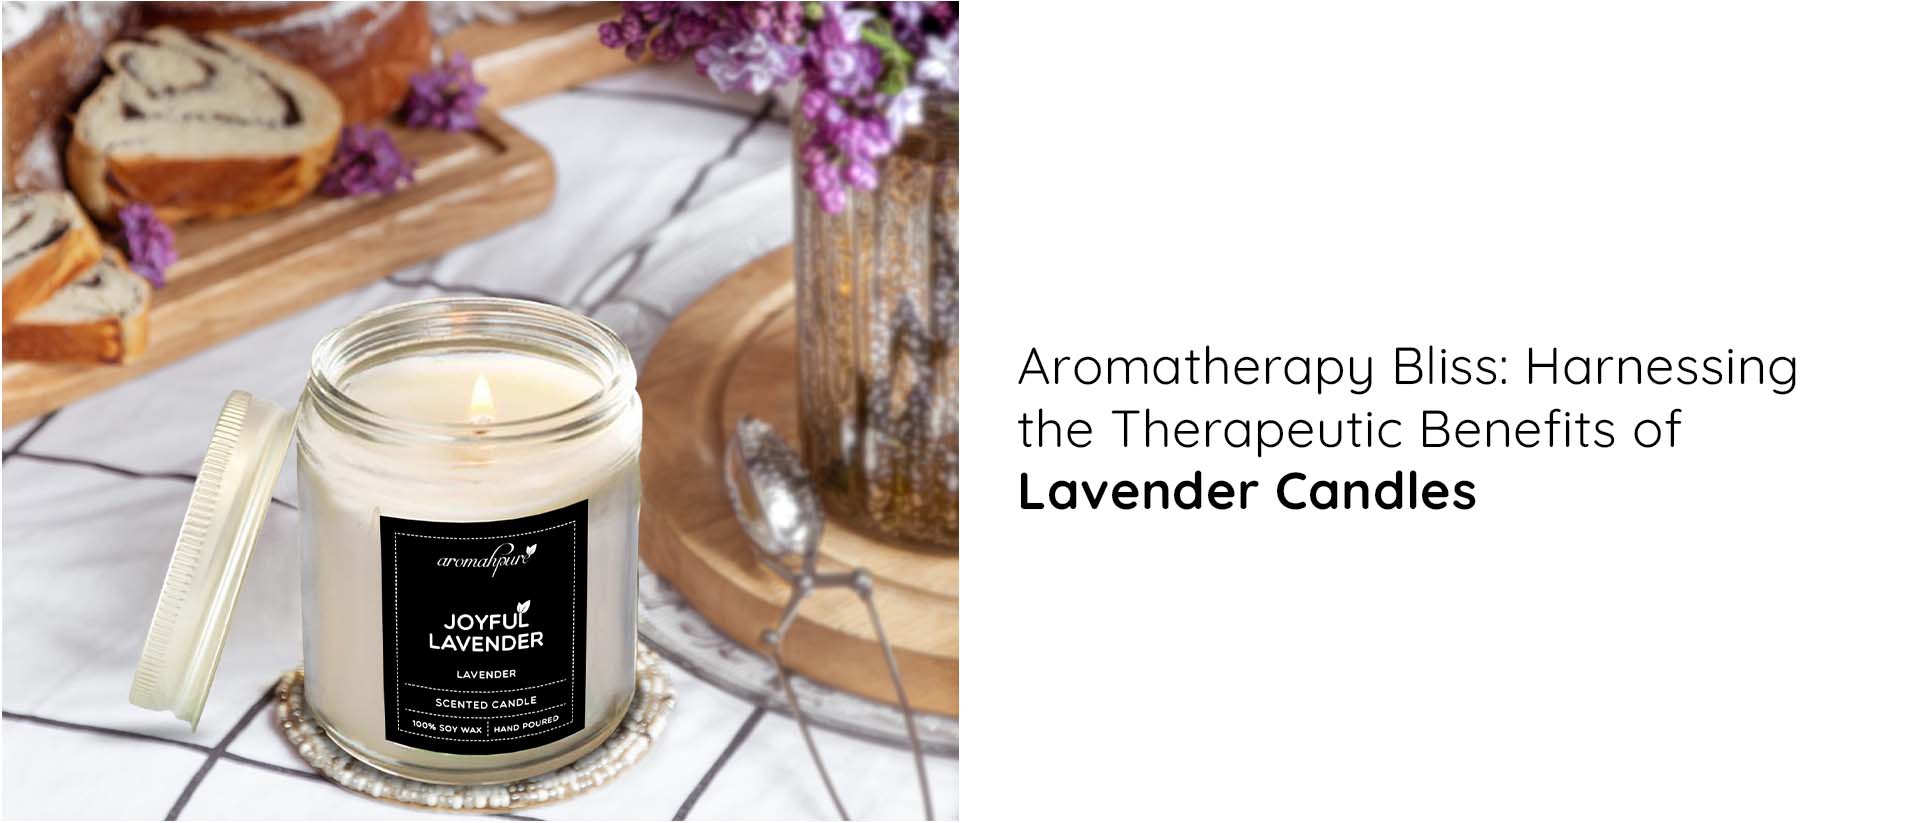 Aromatherapy Bliss: Harnessing the Therapeutic Benefits of Lavender Candles